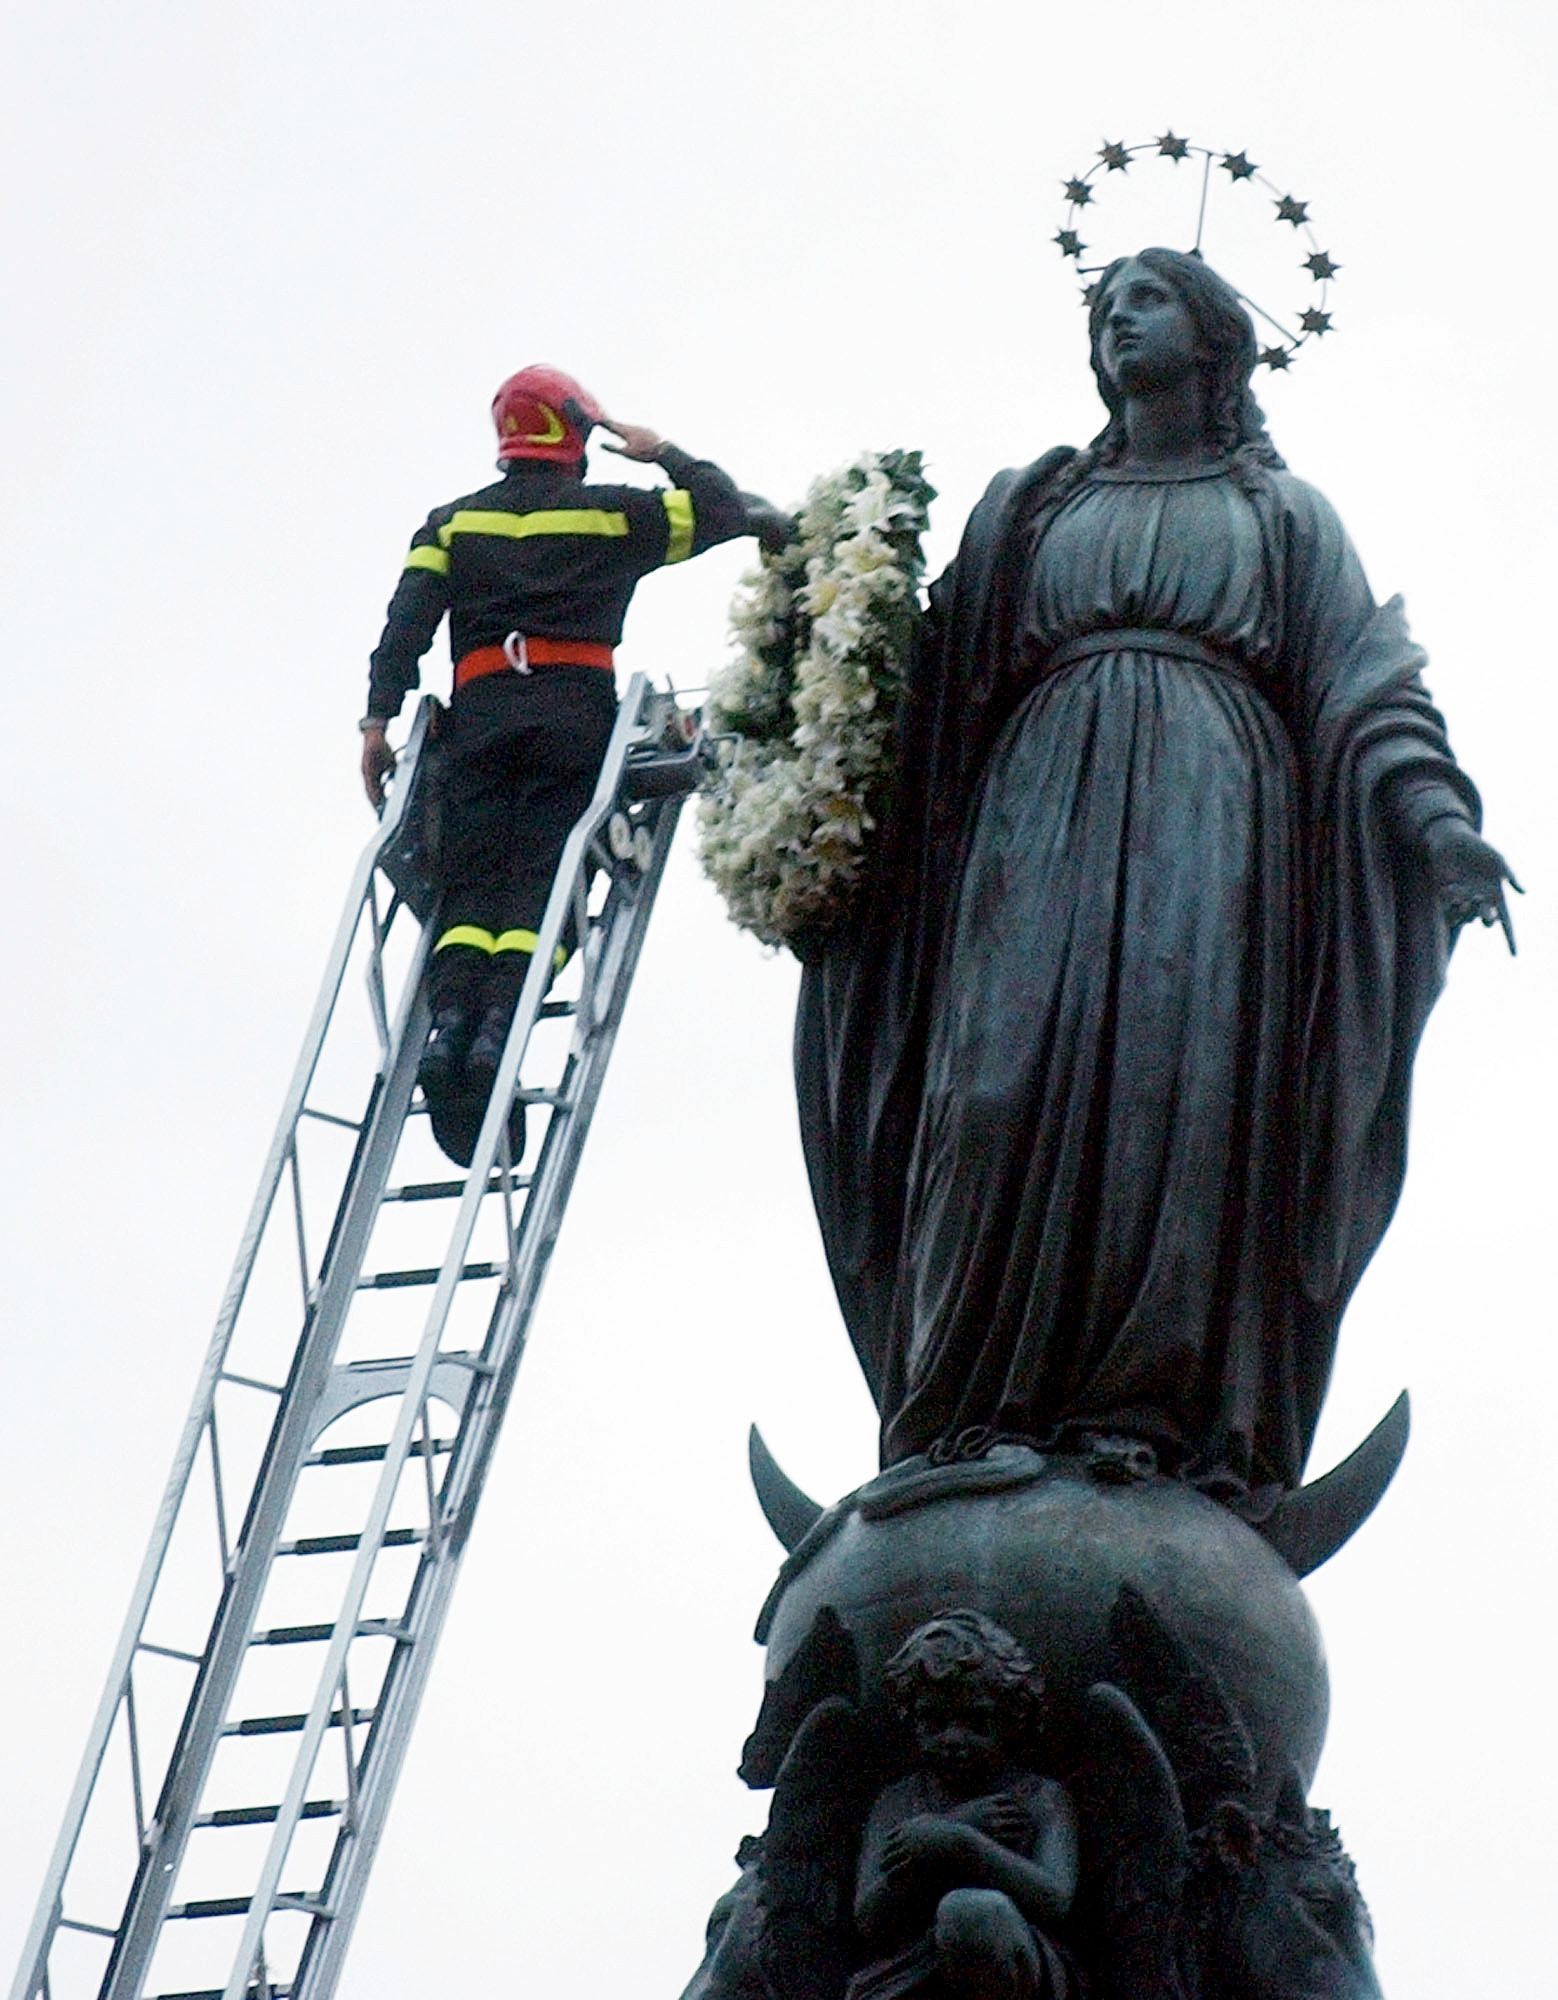 WEB2-PHOTO-OF-THE-DAY-IMMACULATE-CONCEPTION-FIREFIGHTER-AP_04120802681-Gregorio-Borgia-AP-Photo